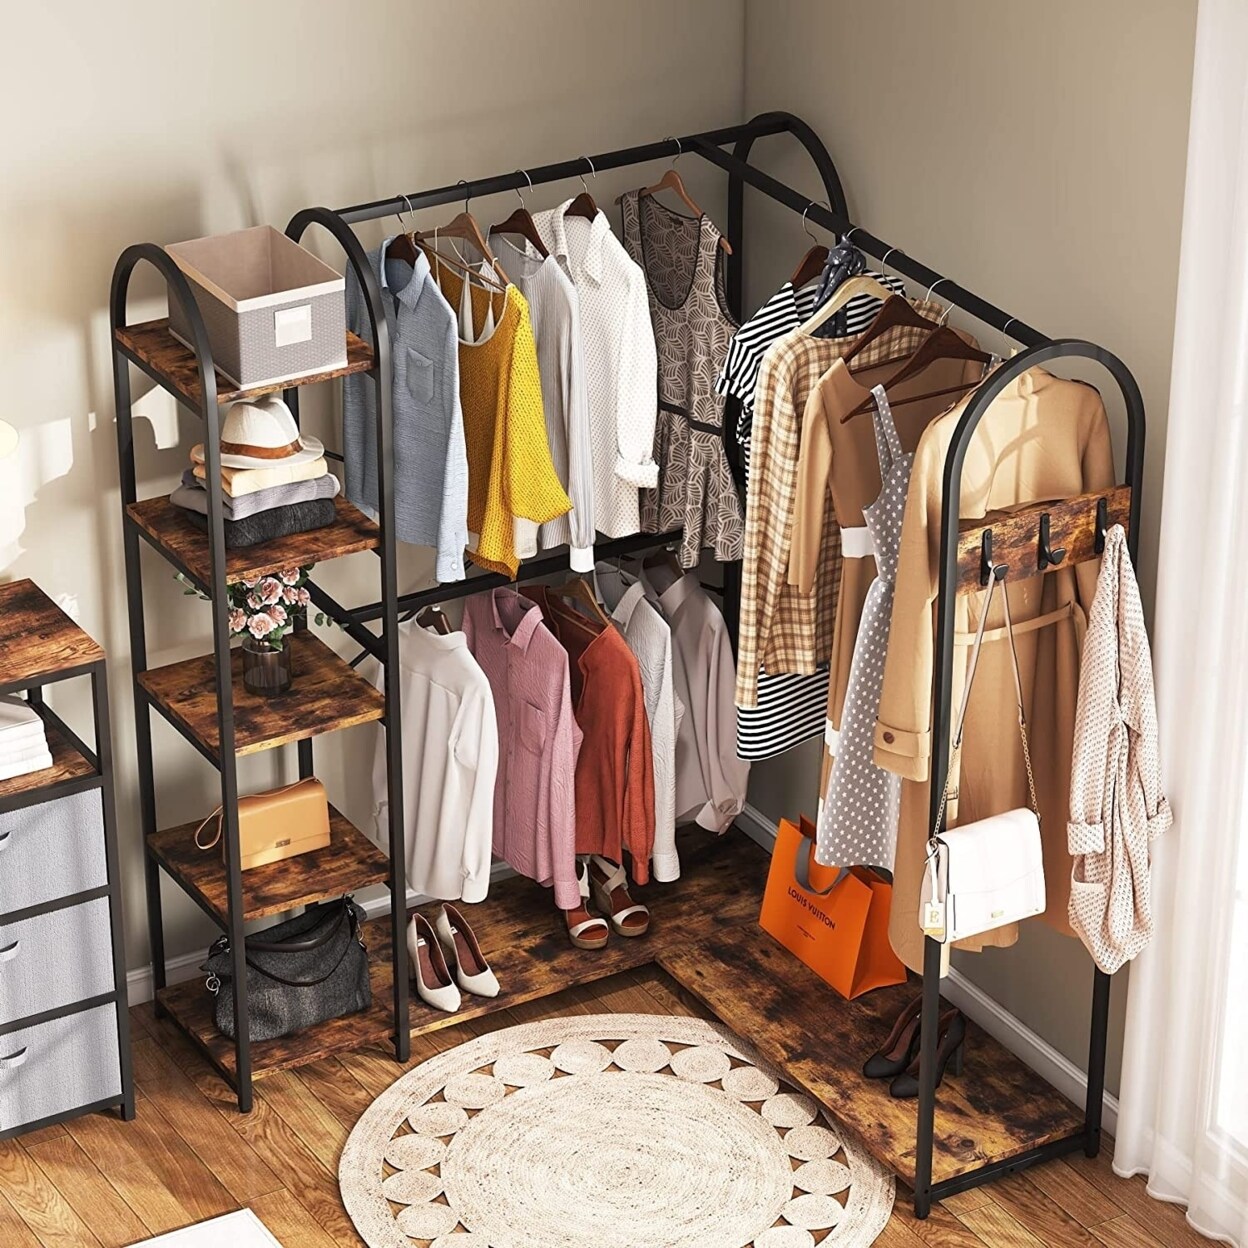 Tribesigns   L Shape Clothes Rack Corner Garment Rack with Storage Shelves and Hanging Rods Space-Saving Large Open